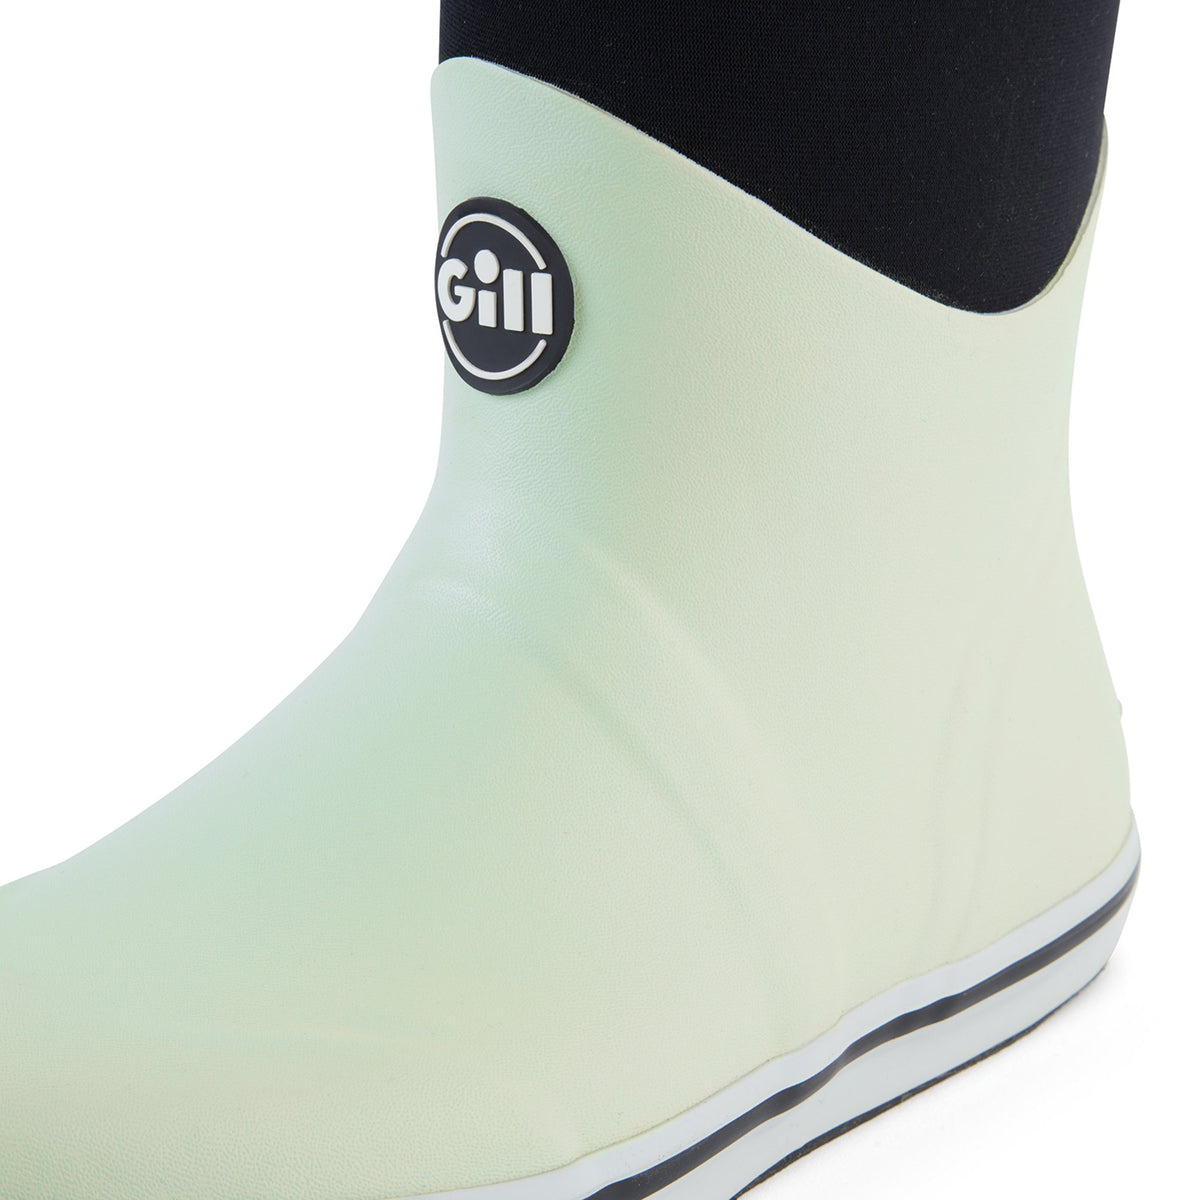 Gill Hydro Mid Boot